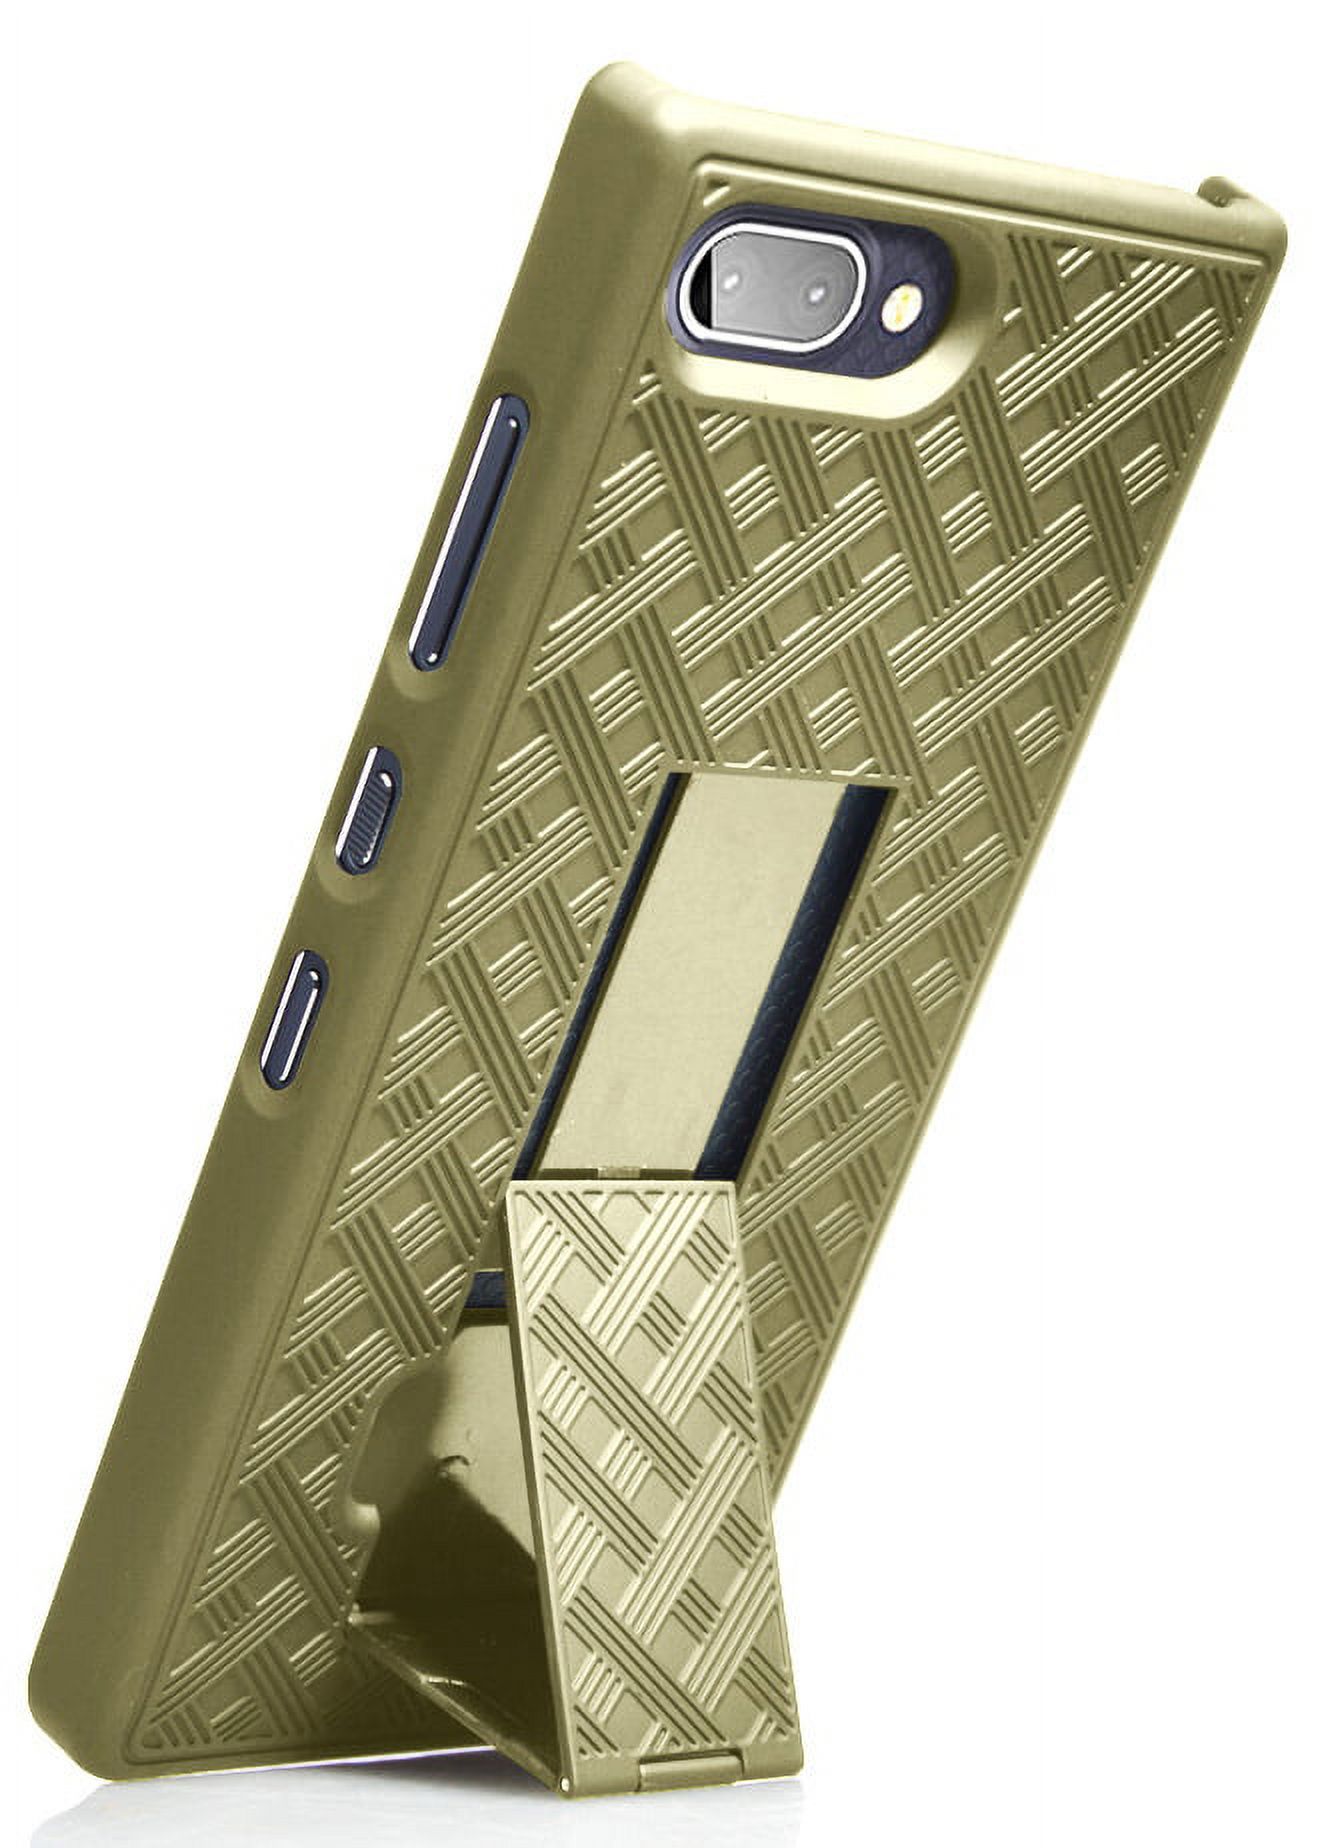 Case for BlackBerry Key2 LE, Nakedcellphone [Champagne Gold] Slim Ribbed Hard Shell Cover [with Kickstand] for BlackBerry Key2 LE Phone [[ONLY LE MODEL]] BBE100-1, BBE100-2, BBE100-4, BBE100-5 - image 2 of 7